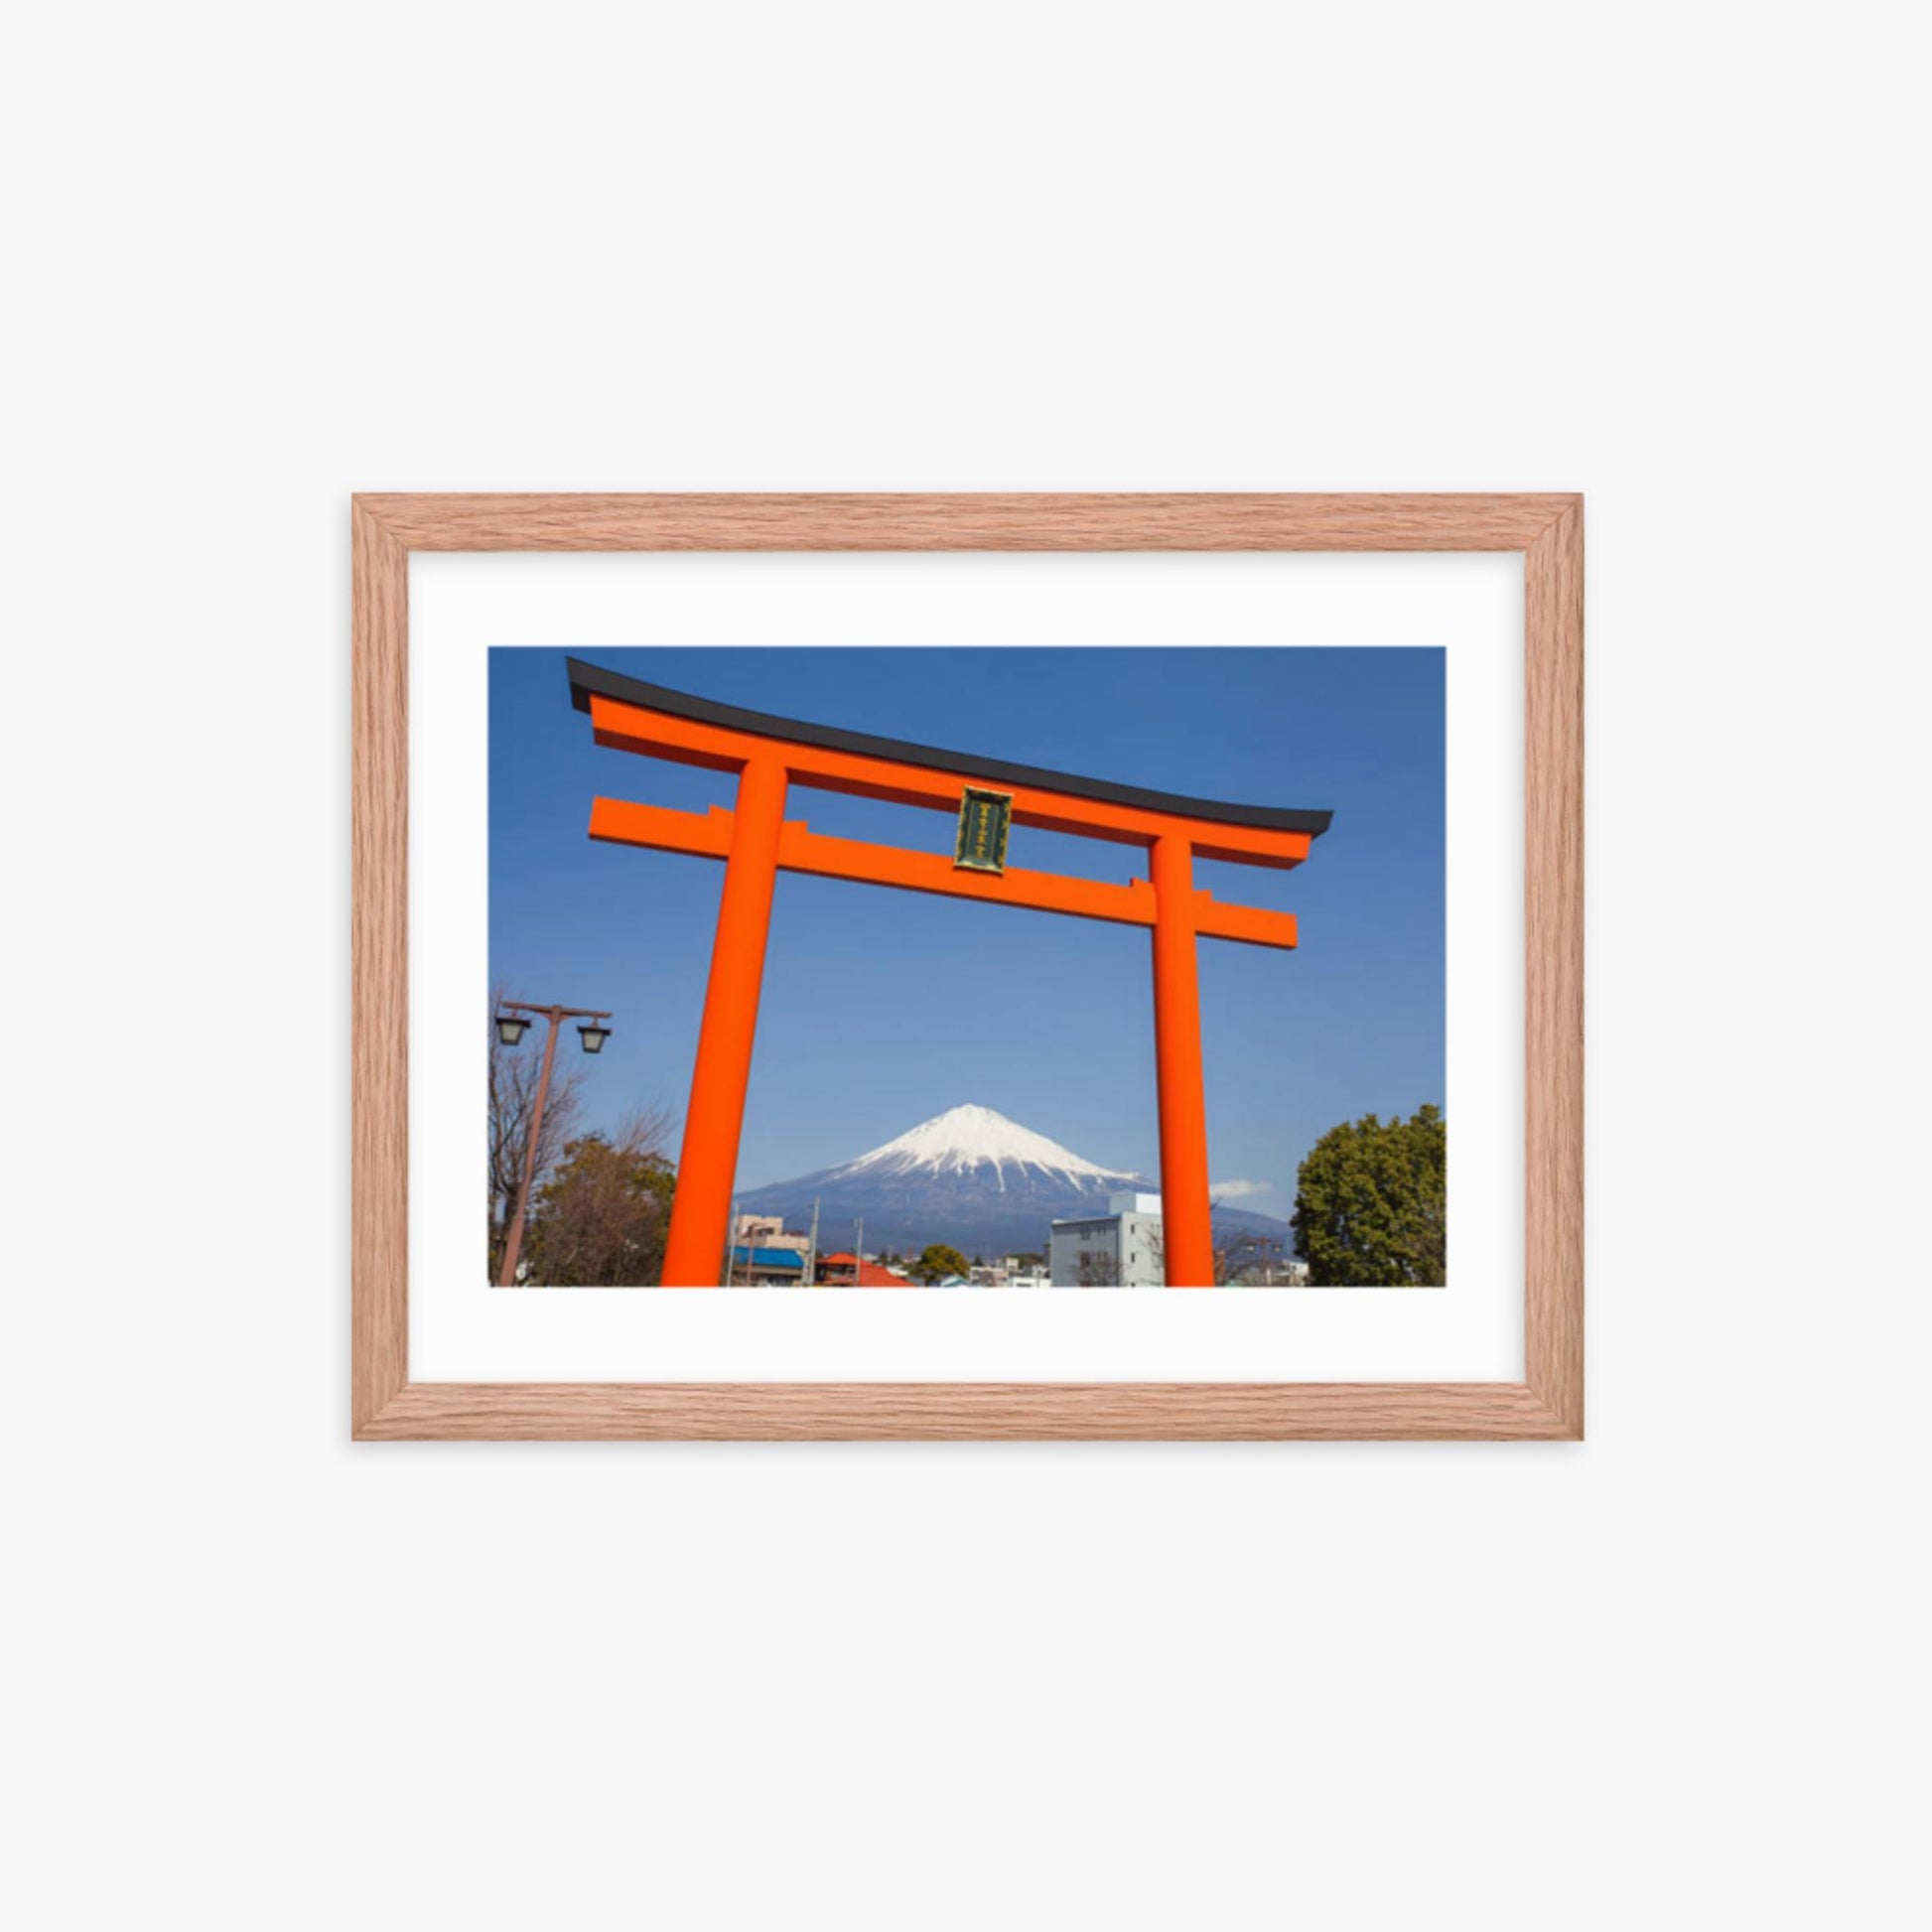 Mount Fuji 12x16 in Poster With Oak Frame